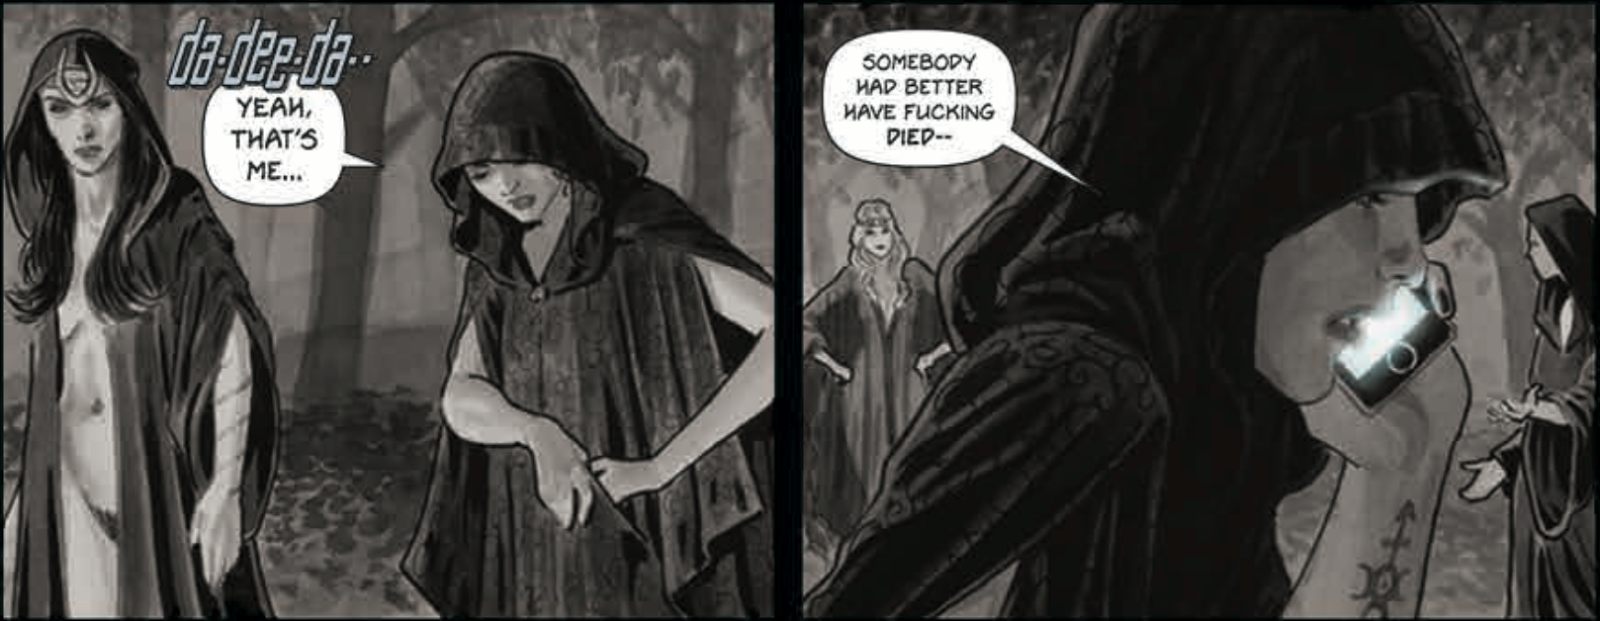 Bad Things Happen In A New Comic Where A Cop Secretly Practices Witchcraft